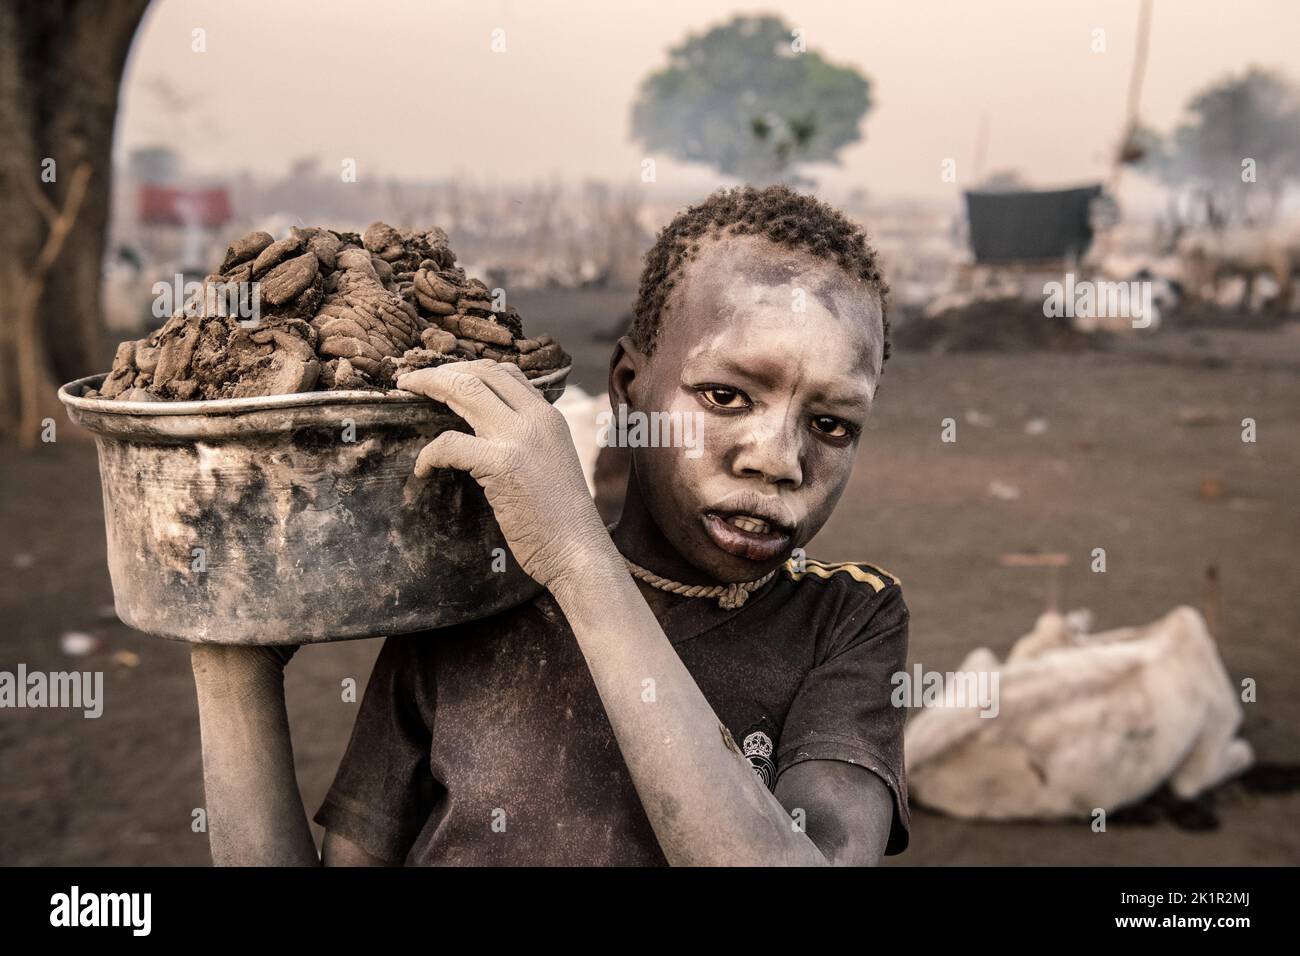 A child carrying leather to put on the fire. South Sudan: THESE STUNNING images show the incredible bond between the Mundari people and their cattle i Stock Photo